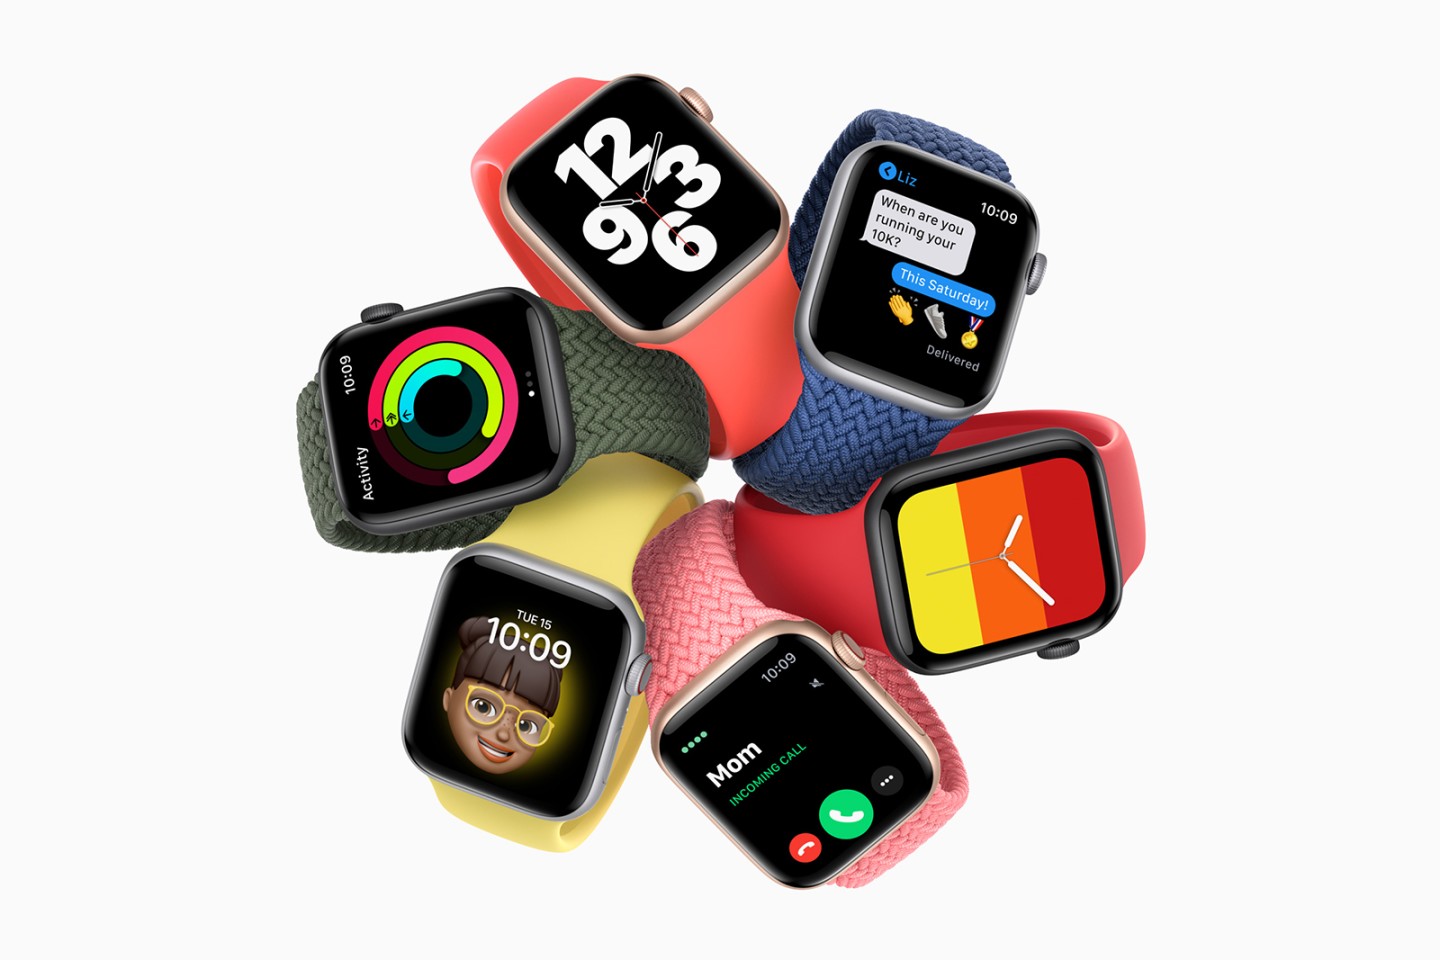 The SE is a more affordable Apple Watch